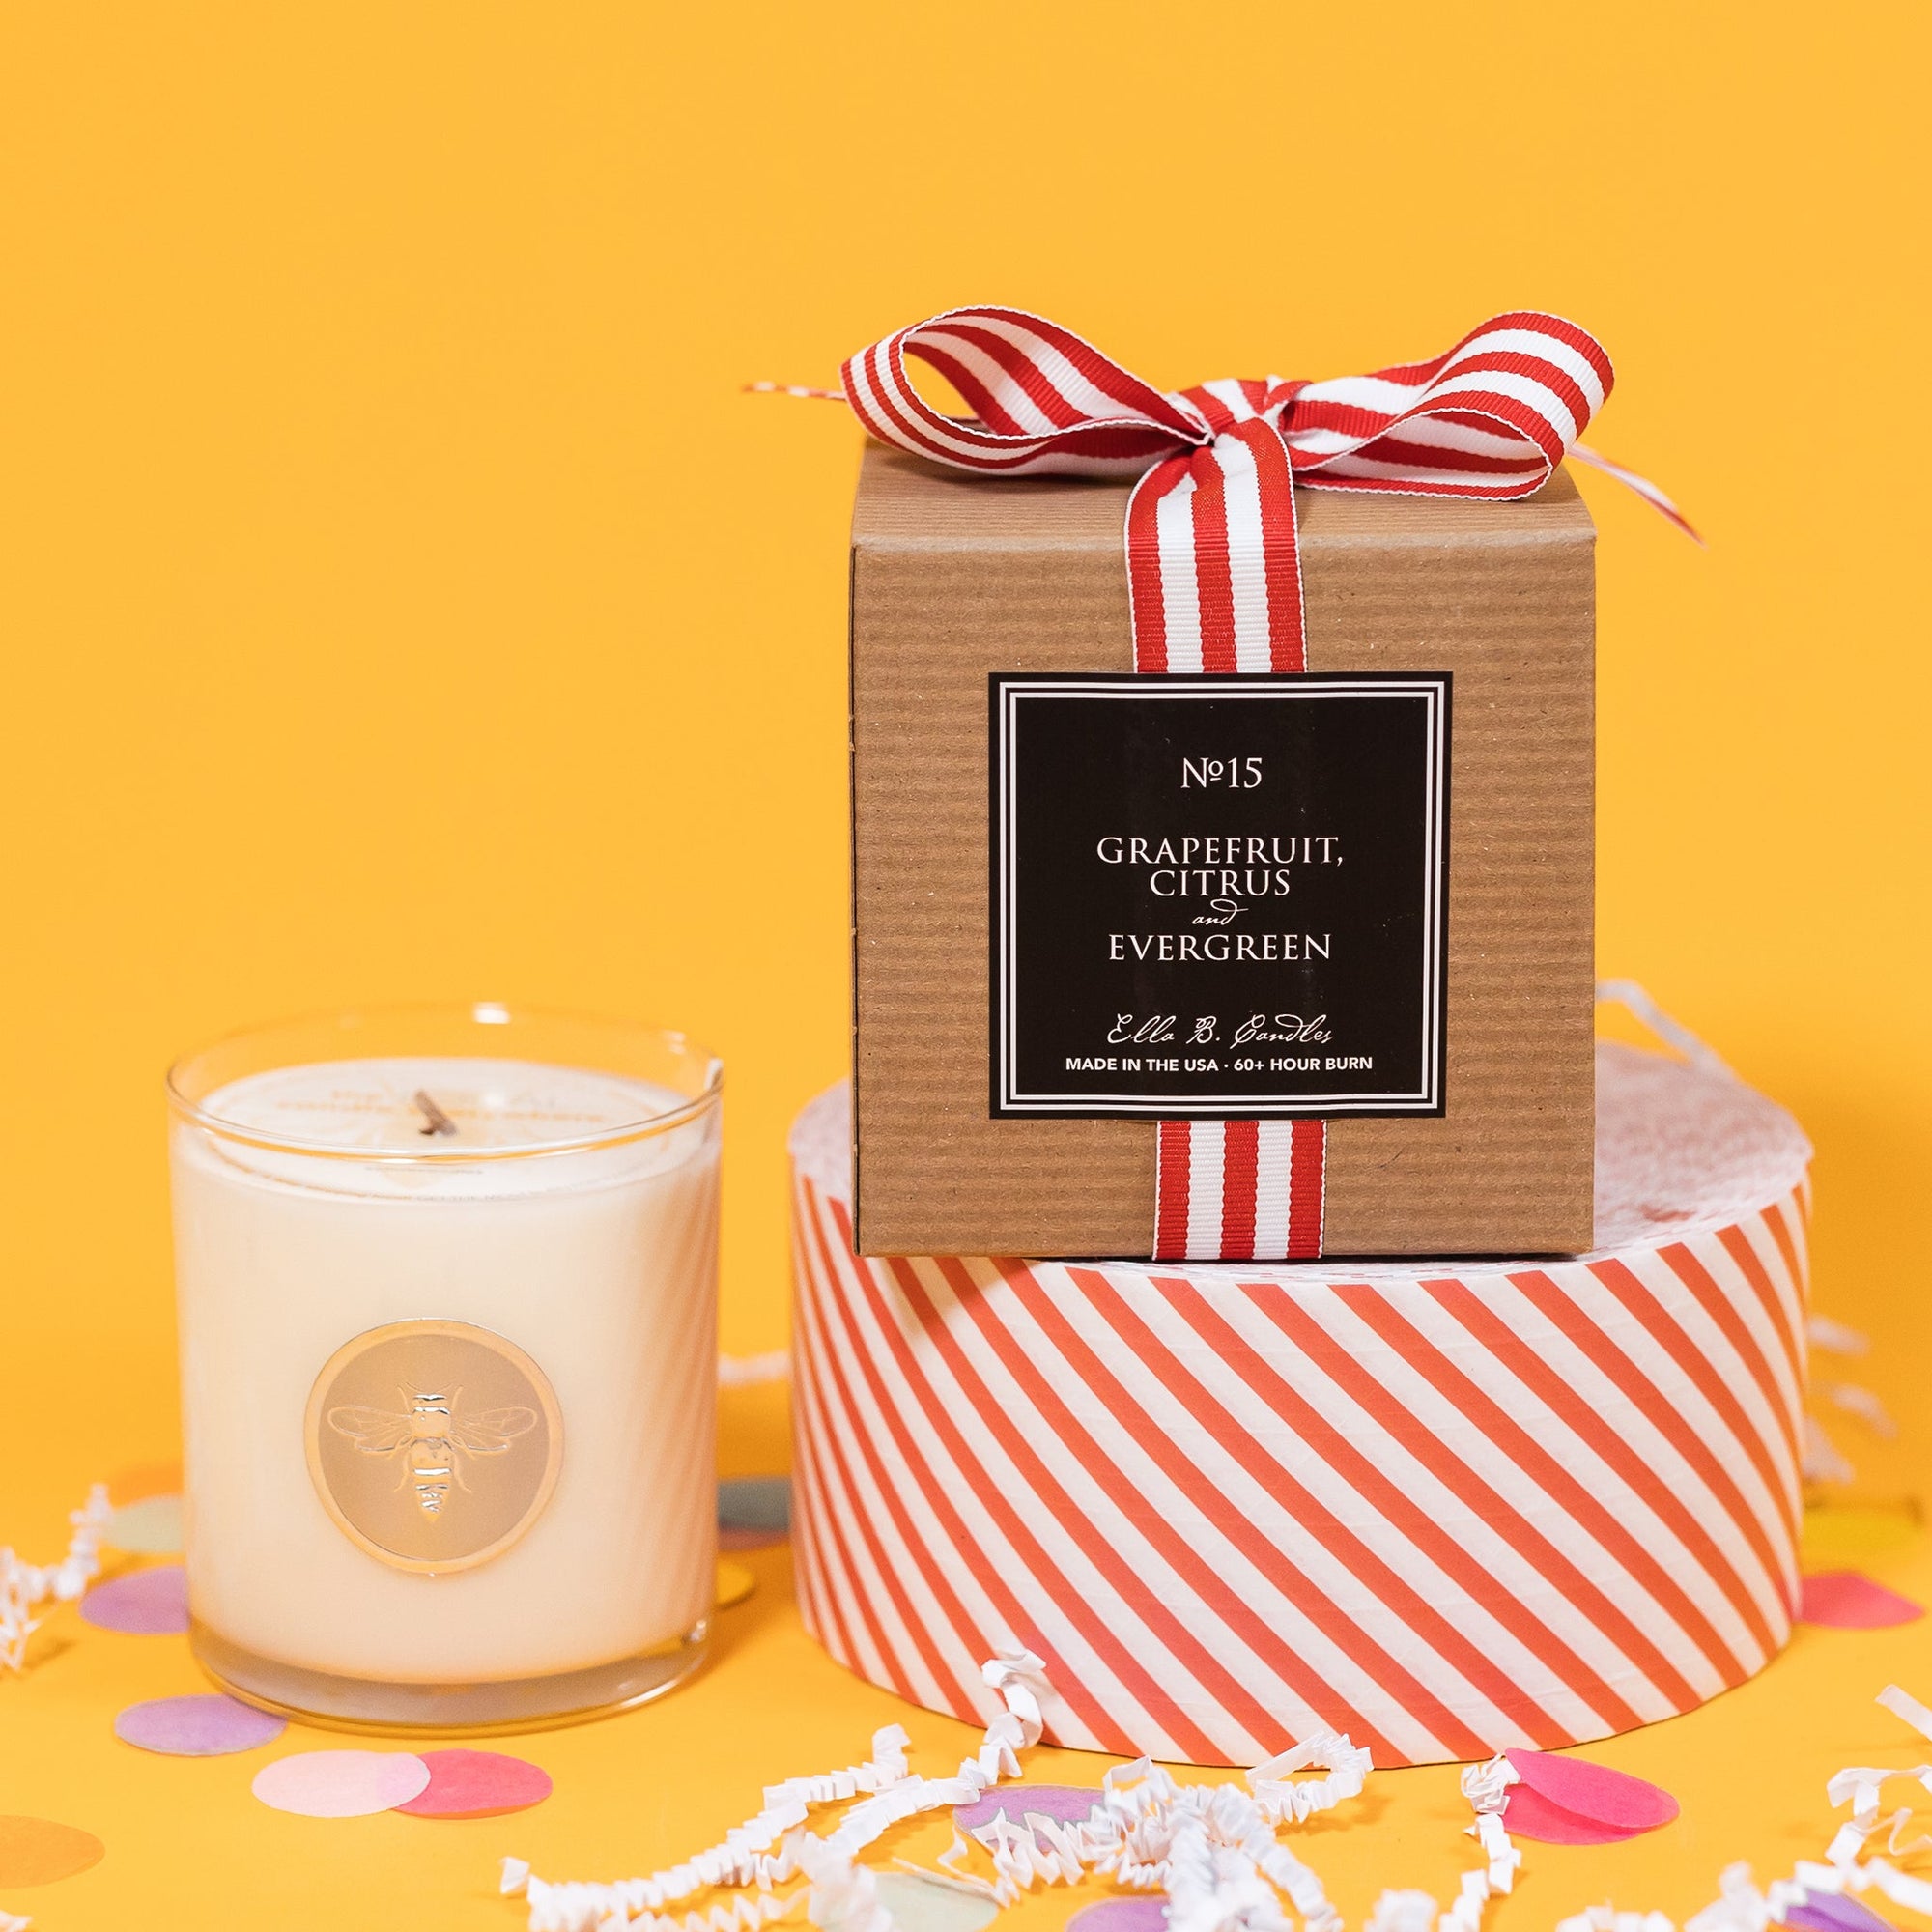 On a sunny mustard background is a candle with the back of a box and white crinkle with big, colorful confetti scattered around. The clear glass candle has a gold foil round label with an illustration of a bee on it. There is a kraft box with red and white striped ribbon tied at the top and on the back is a square black label that says "No. 15 Grapefruit, Citrus and Evergreen, Made in the USA, 60+ Hour Burn."